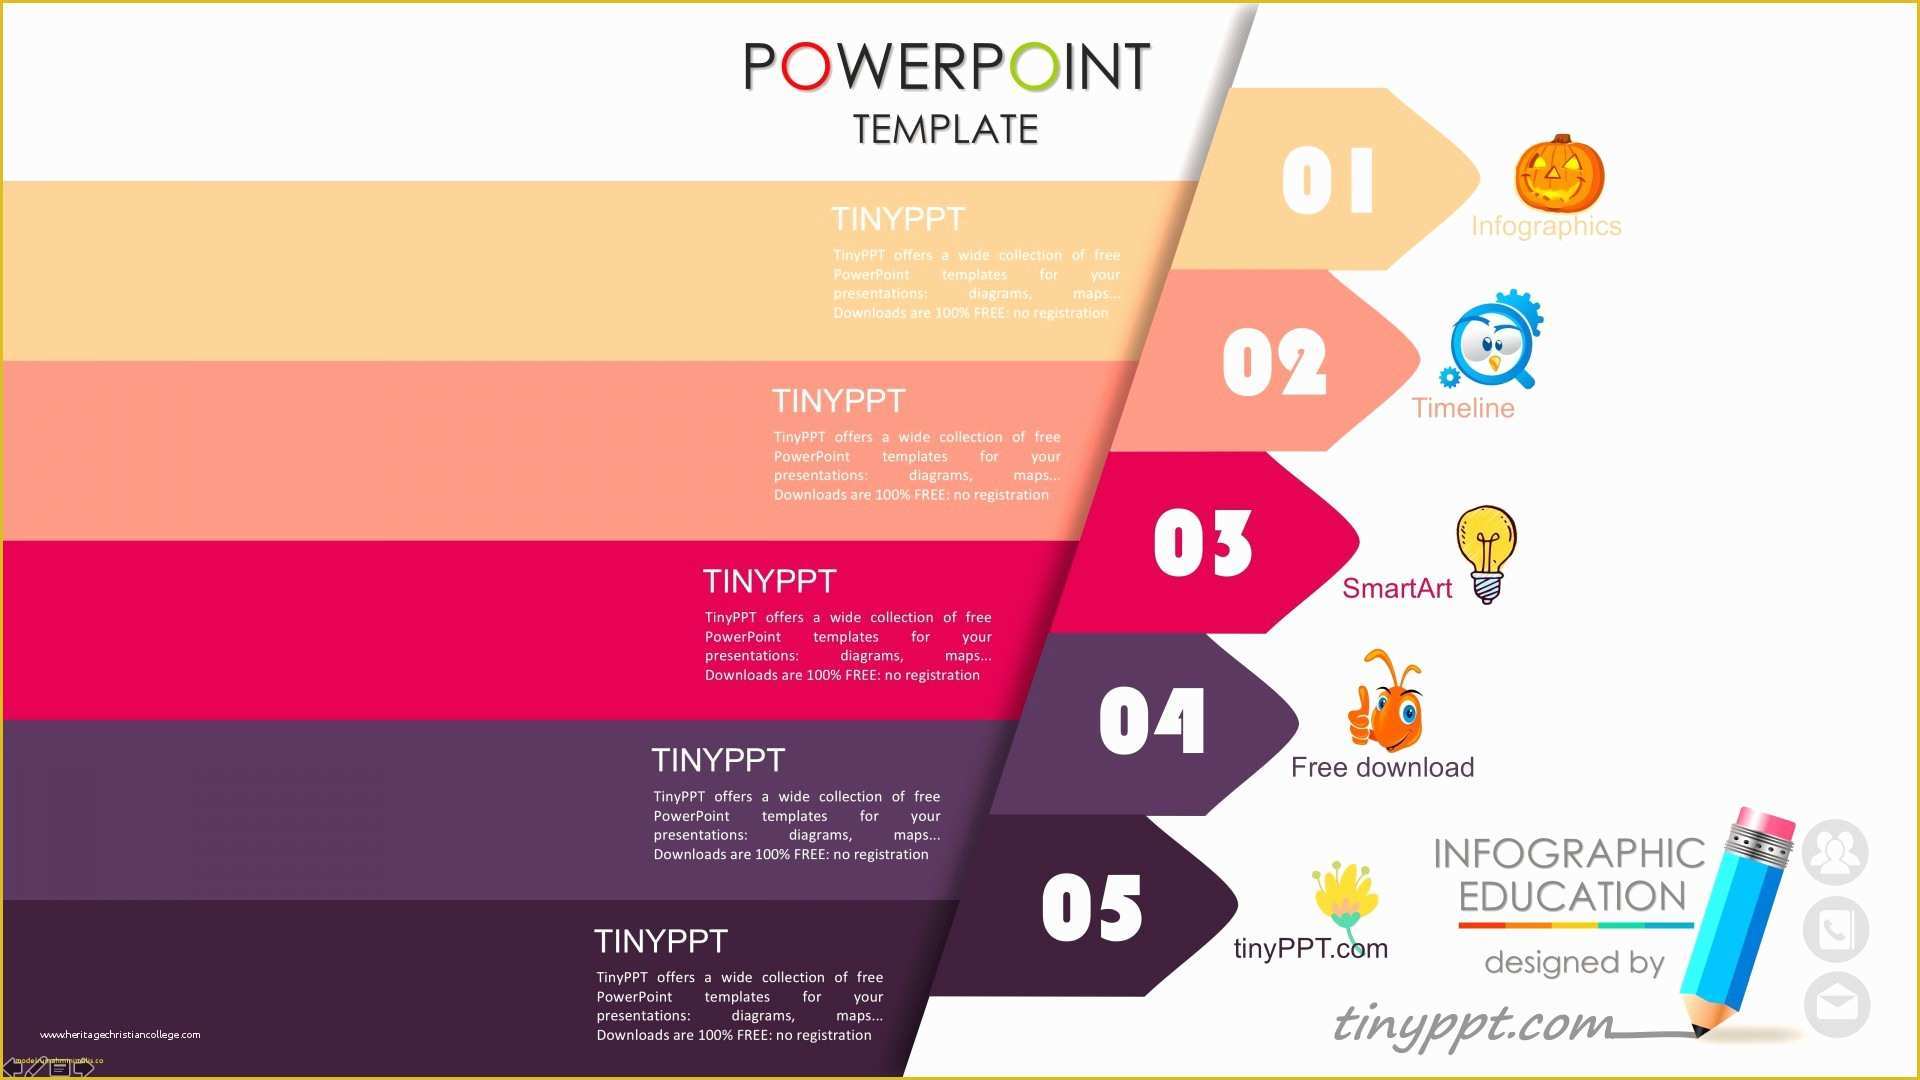 Powerpoint Templates Free Download 2007 Of Best Ppt themes Free Download Powerpoint Templates